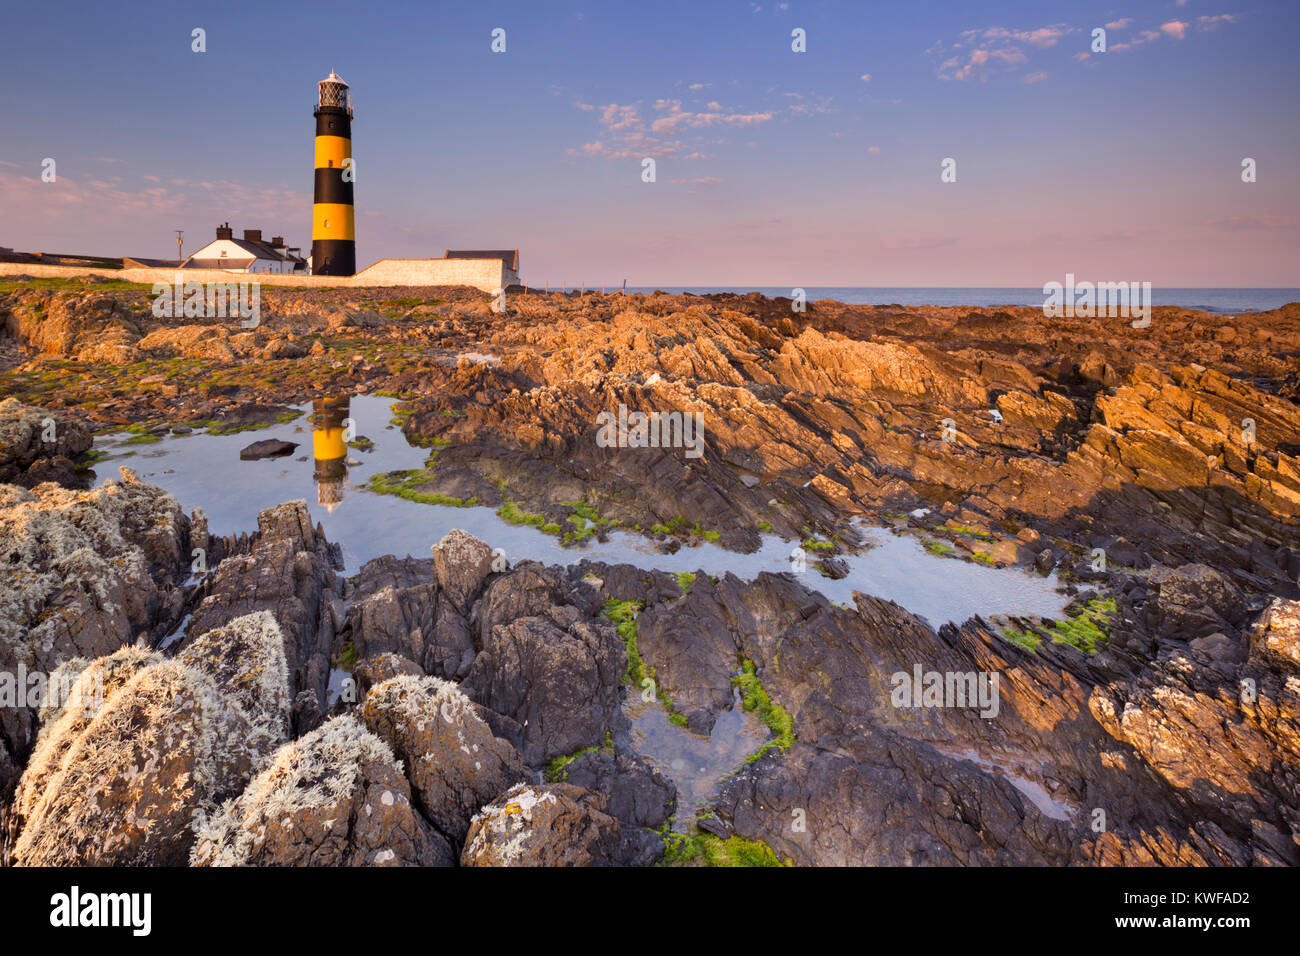 The St. John's Point Lighthouse in Northern Ireland photographed at sunset. Stock Photo